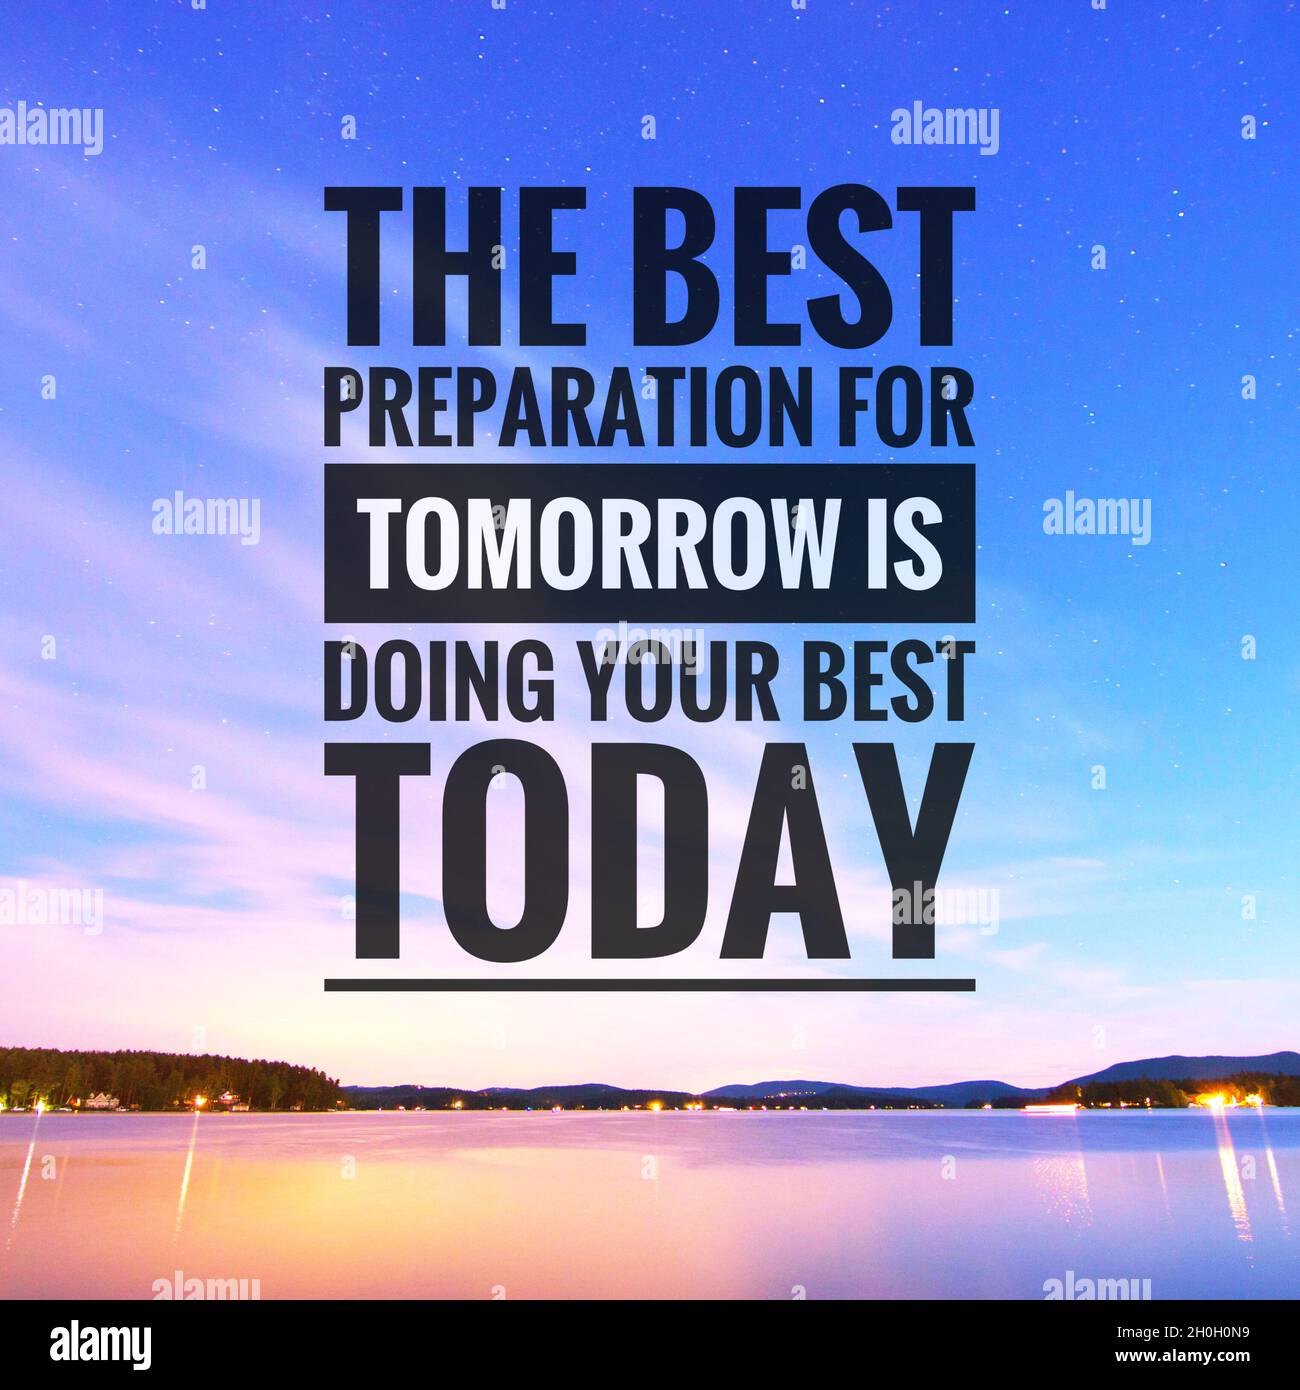 Collection 105+ Images the best preparation for tomorrow is doing best today Stunning